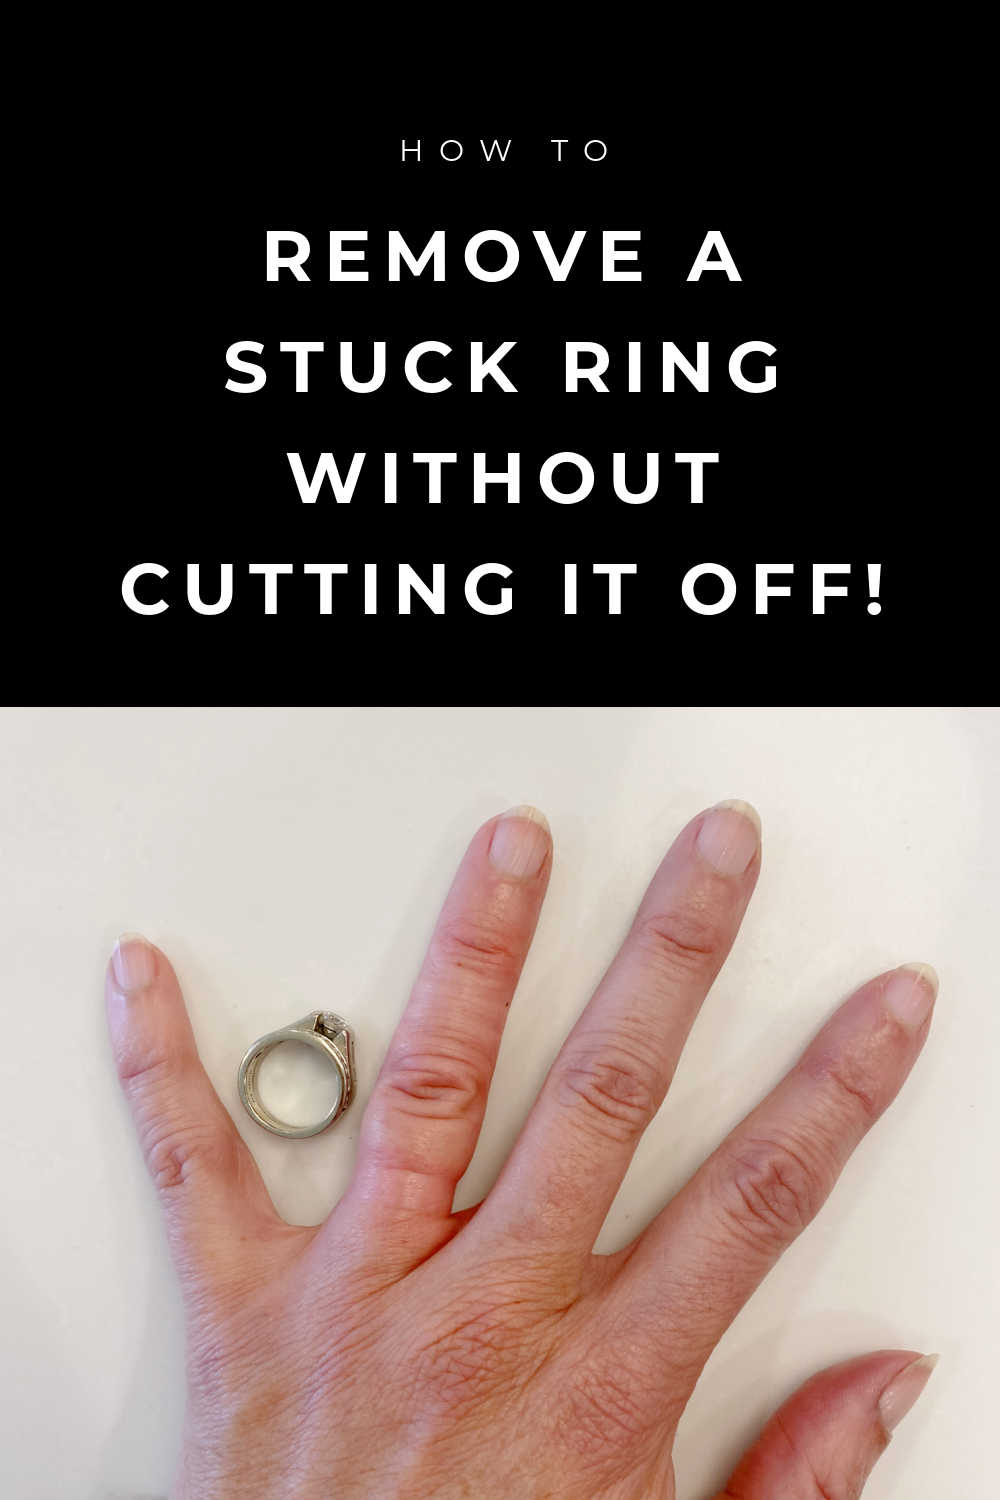 Remove A Ring Stuck On A Sore Swollen Finger With Dental Floss - YouTube